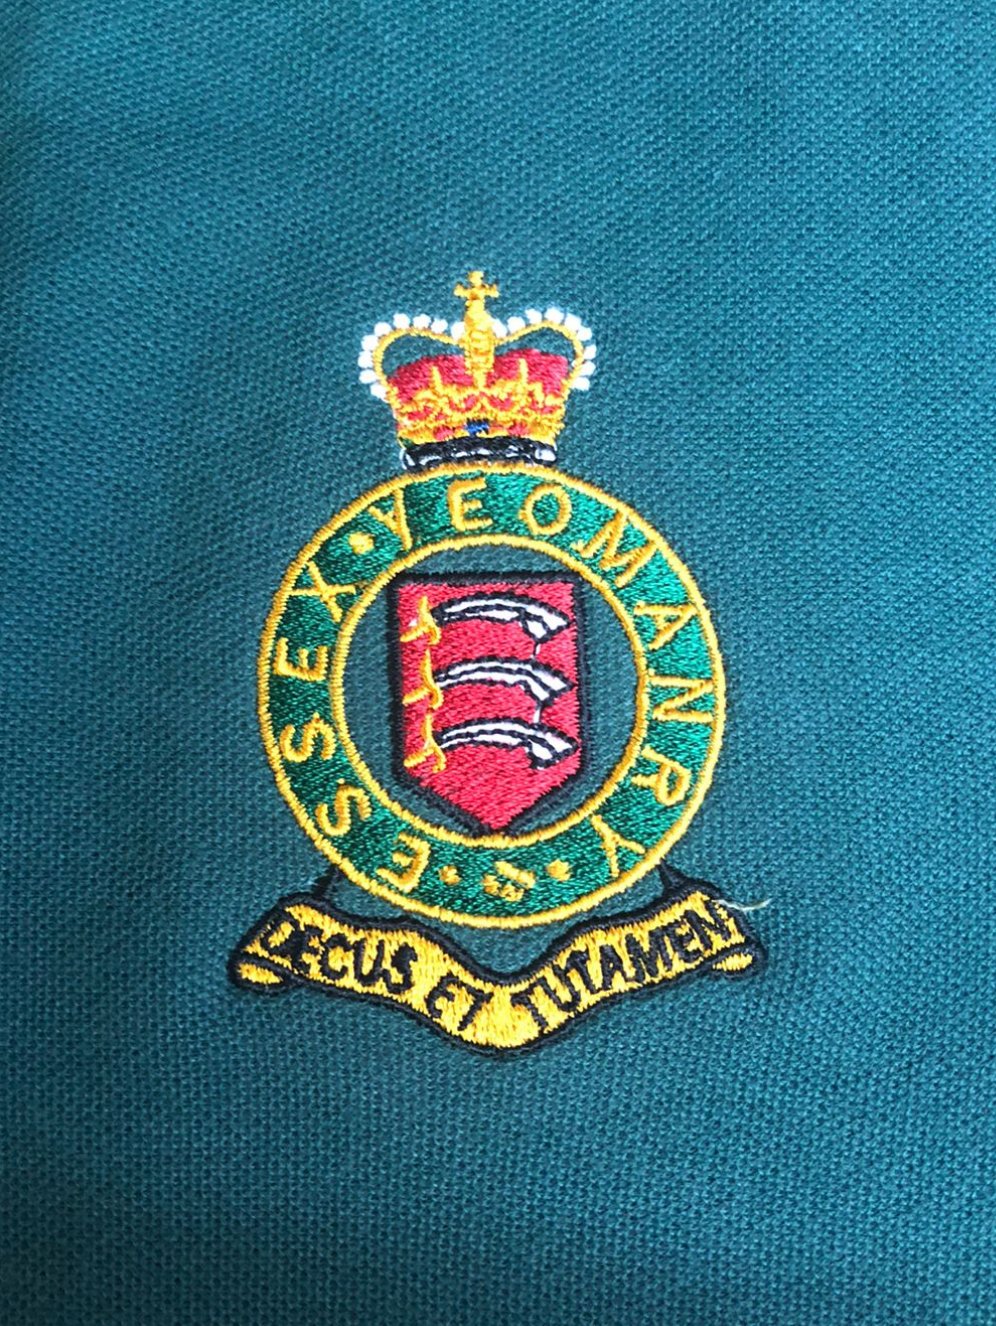 Essex Yeomanry - Embroidered - Choose your Garment